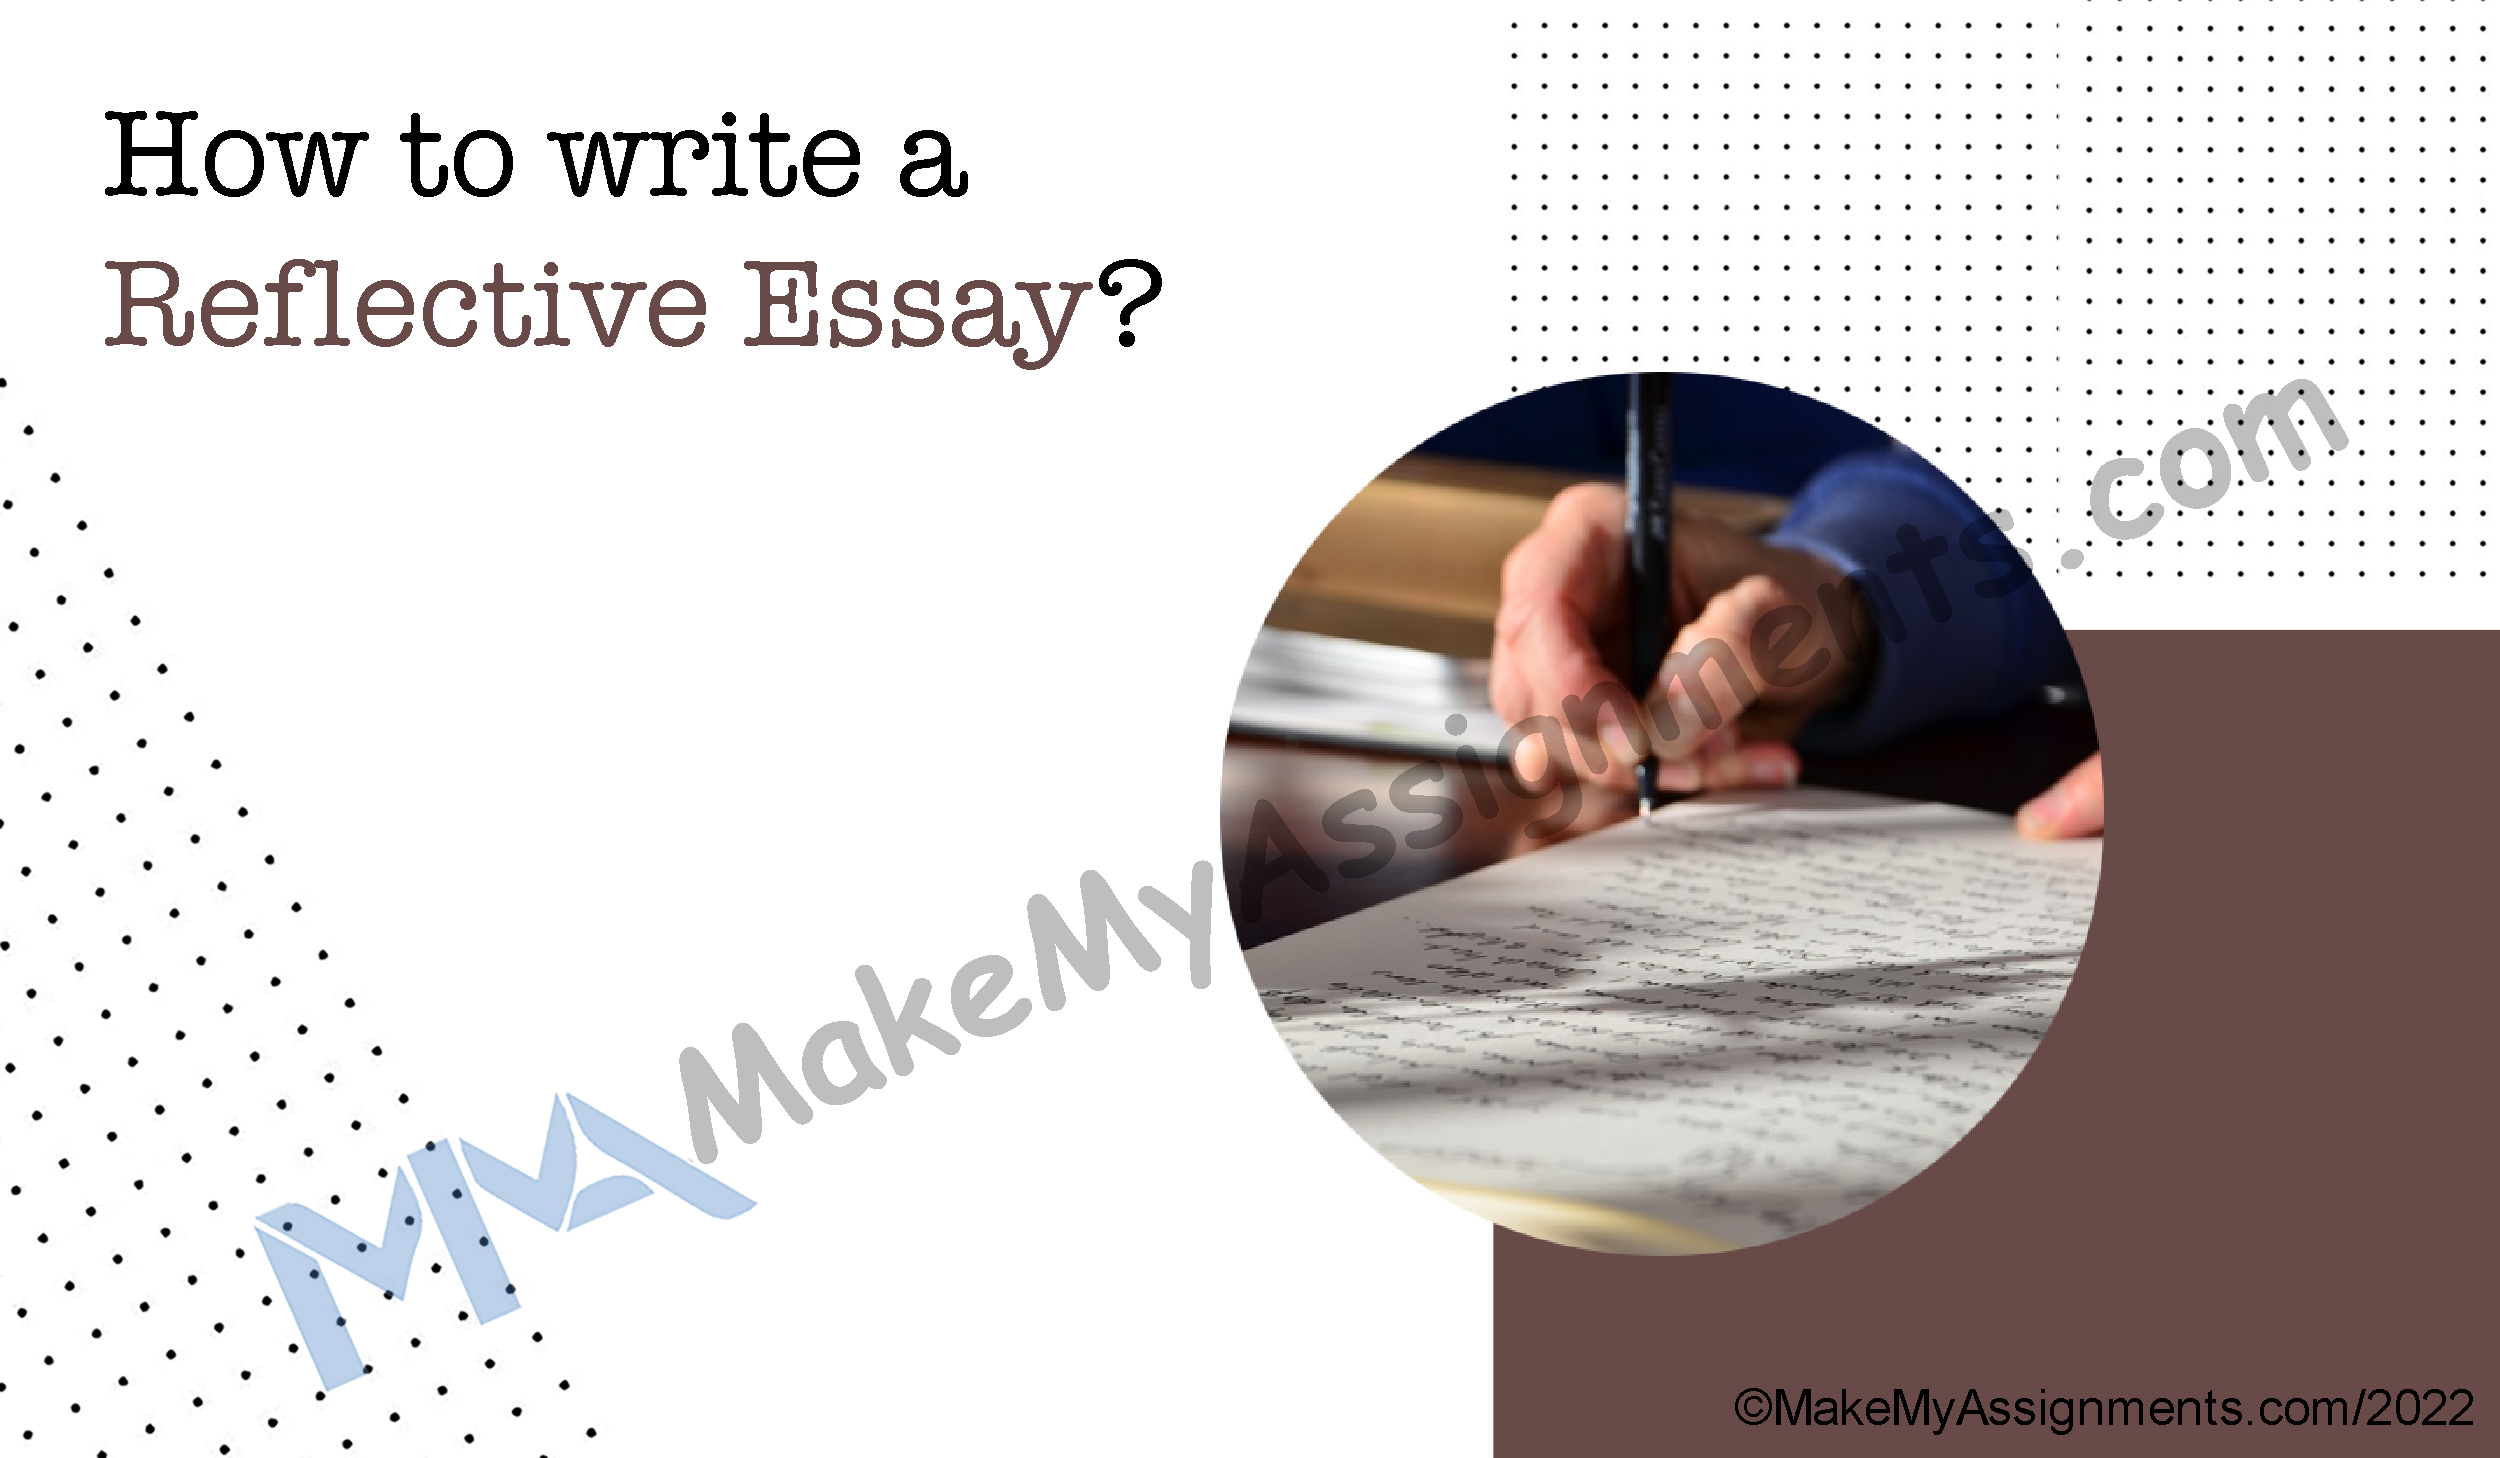 How To Write A Reflective Essay?￼